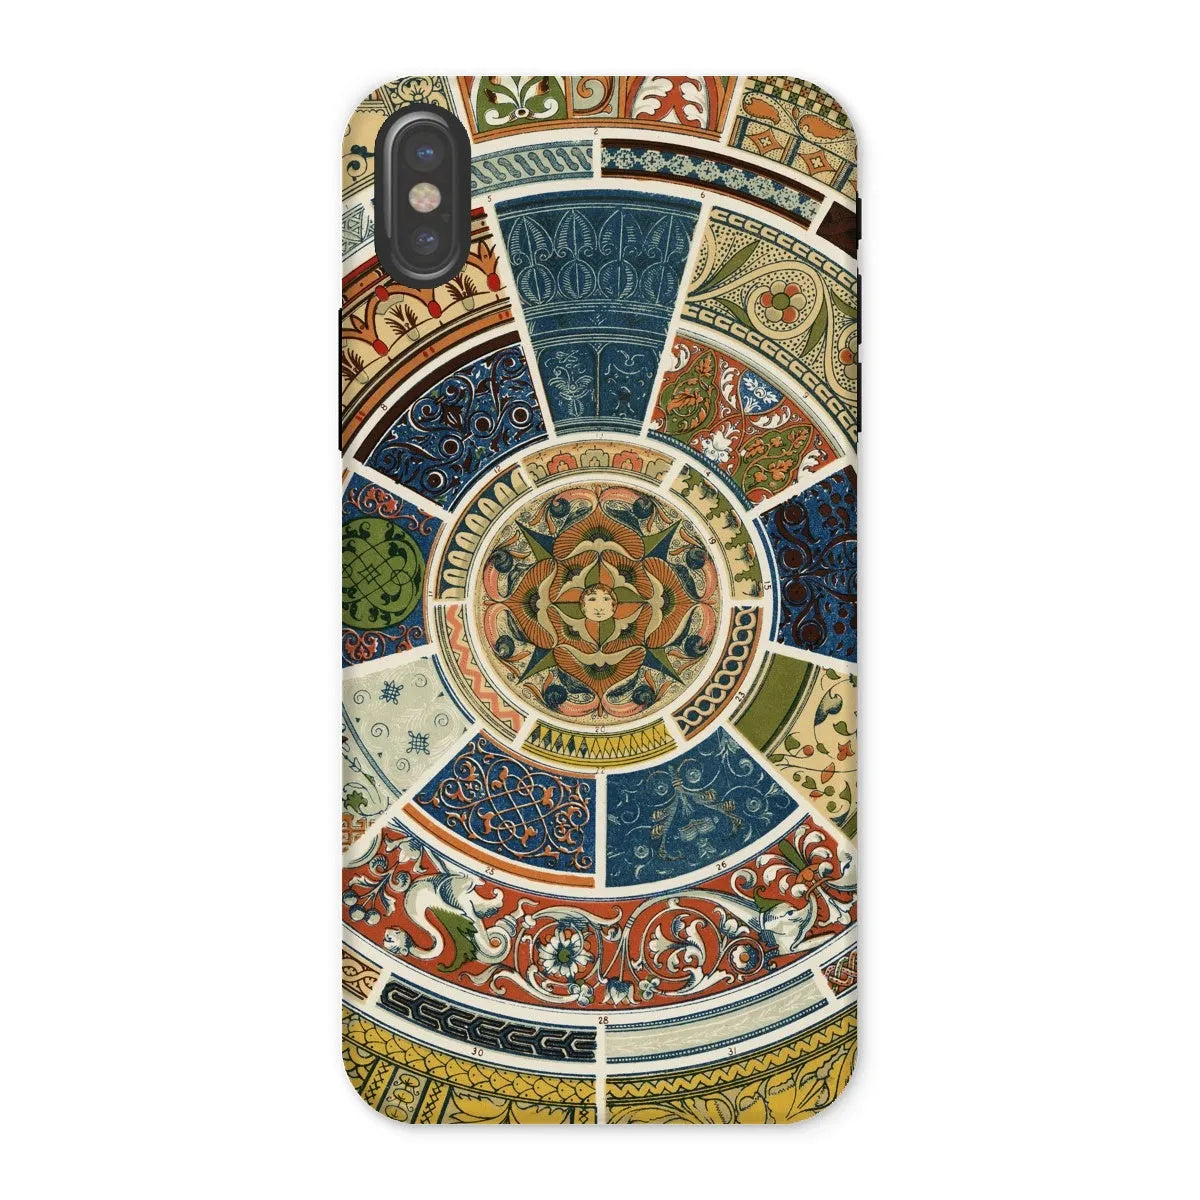 Another Grammar Of Ornament Aesthetic Pattern Art Phone Case - Iphone x / Matte - Mobile Phone Cases - Aesthetic Art